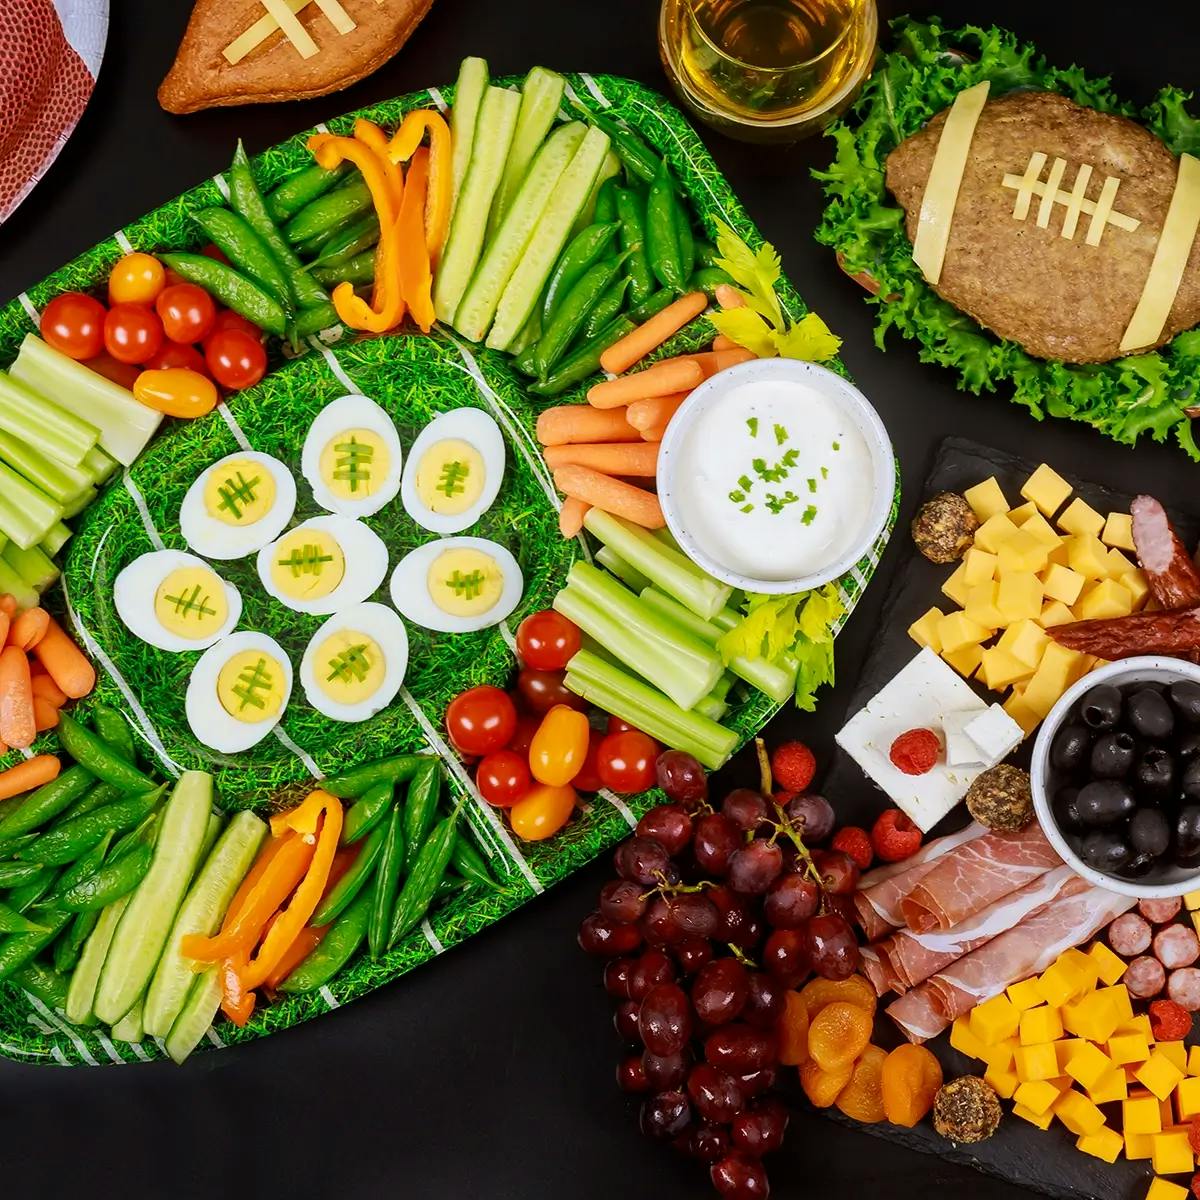 Super Bowl party snacks, including cheese, crackers, dried fruit, deviled eggs, and a vegetable platter that looks like a football field.